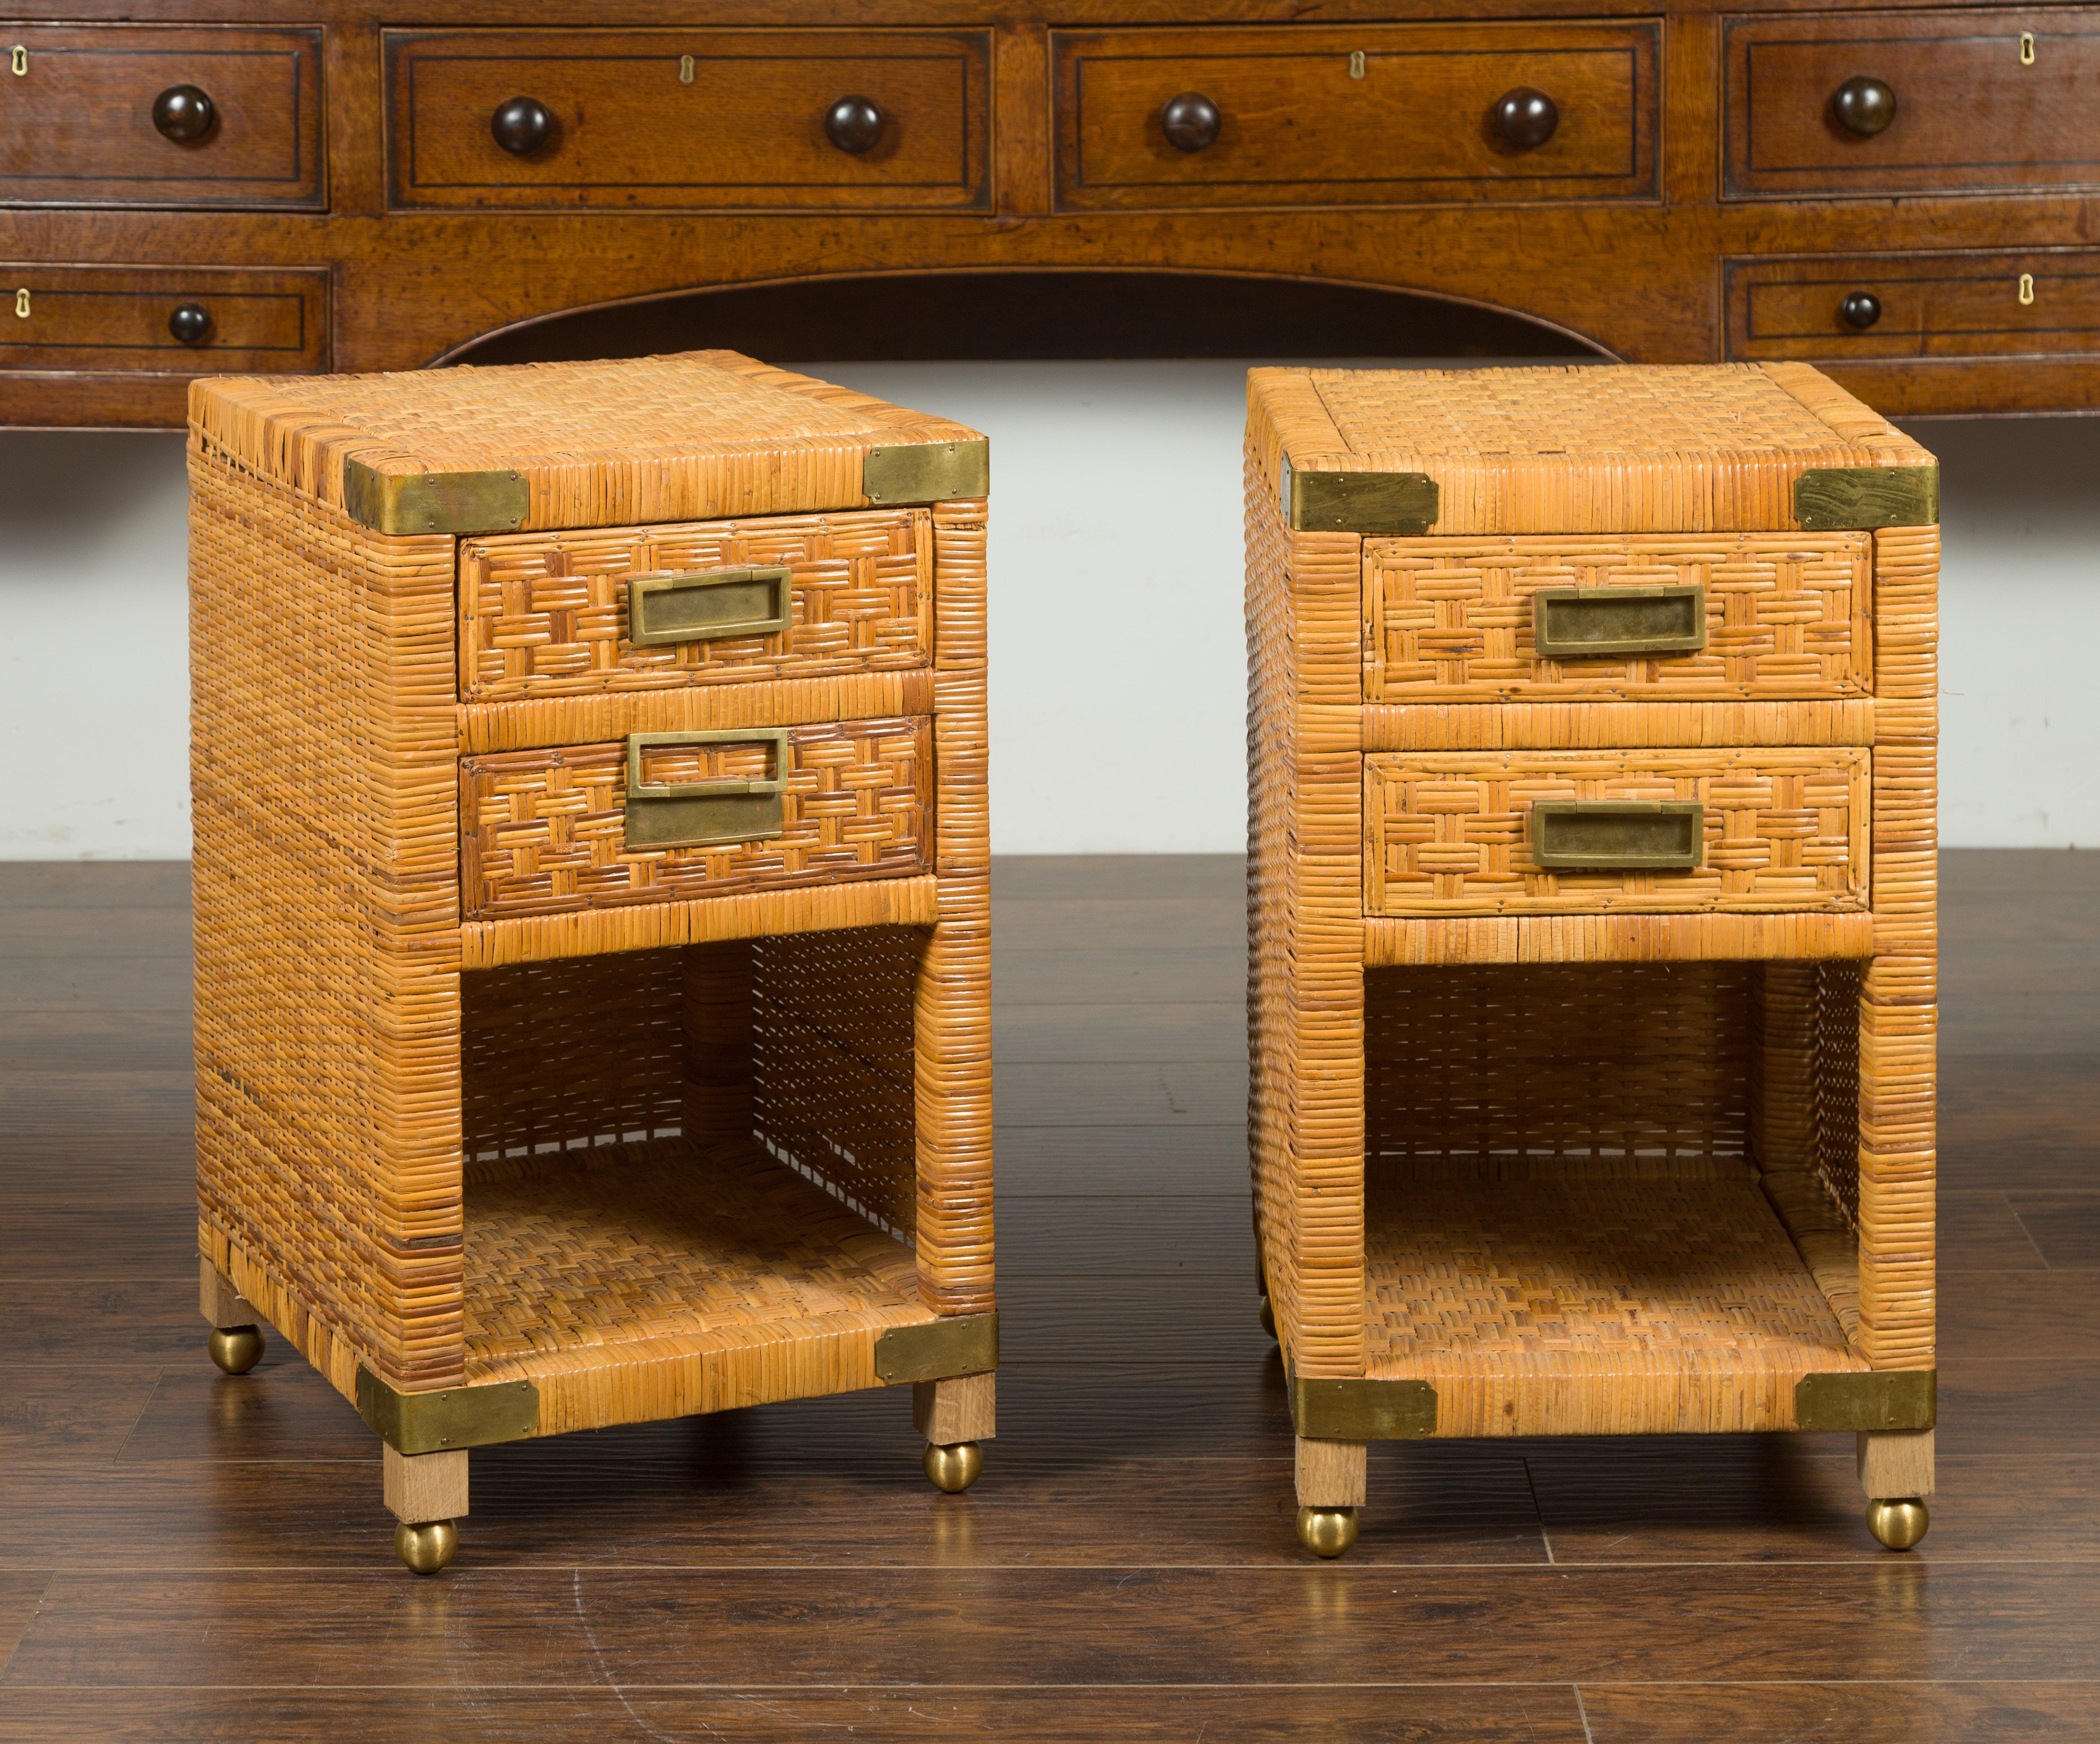 A vintage pair of Asian rattan bedside tables from the mid-20th century, with drawers and brass accents. Created during the mid-20th century, each of this pair of rattan bedside tables features a rectangular top sitting above two drawers, fitted